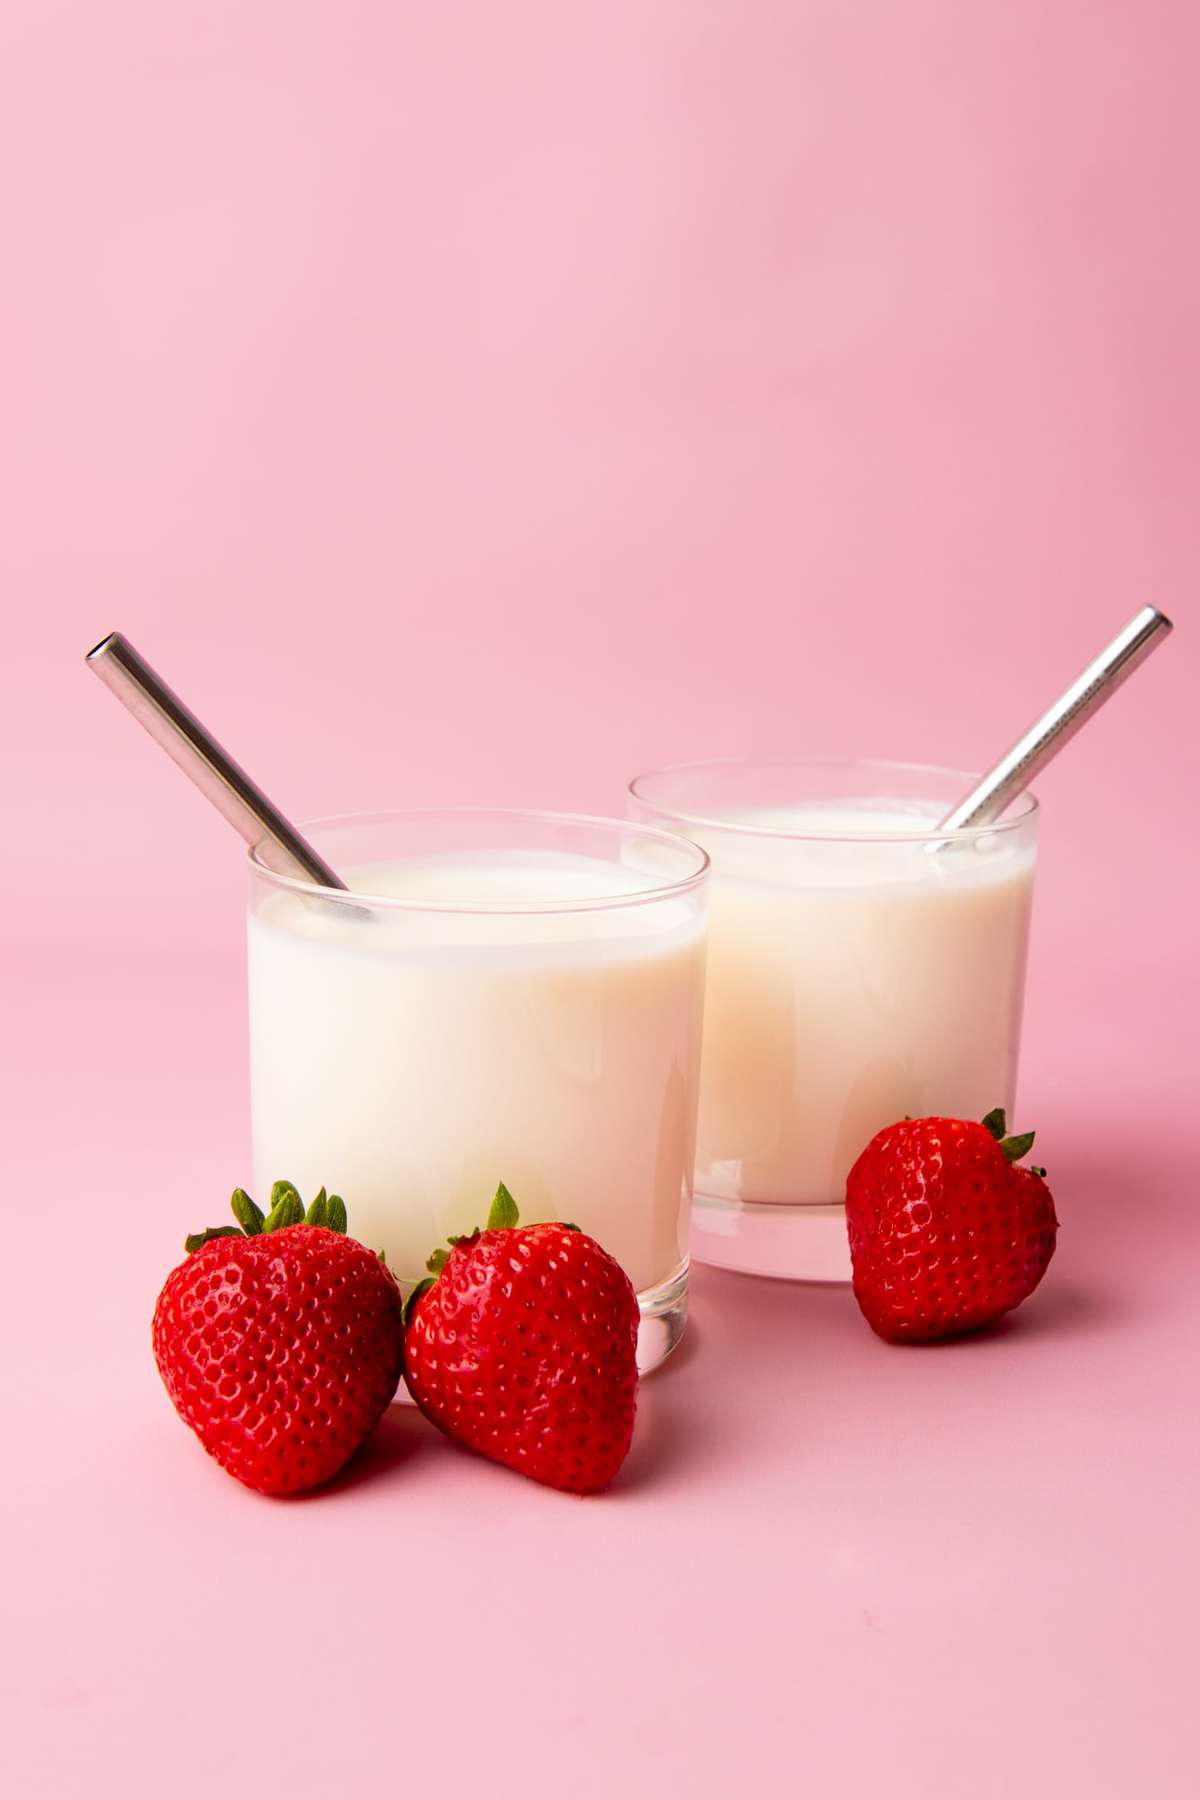 Two glass tumblers filled with homemade kefir and metal straws sit on a blush, pink background with ripe, red strawberries leaning against them.